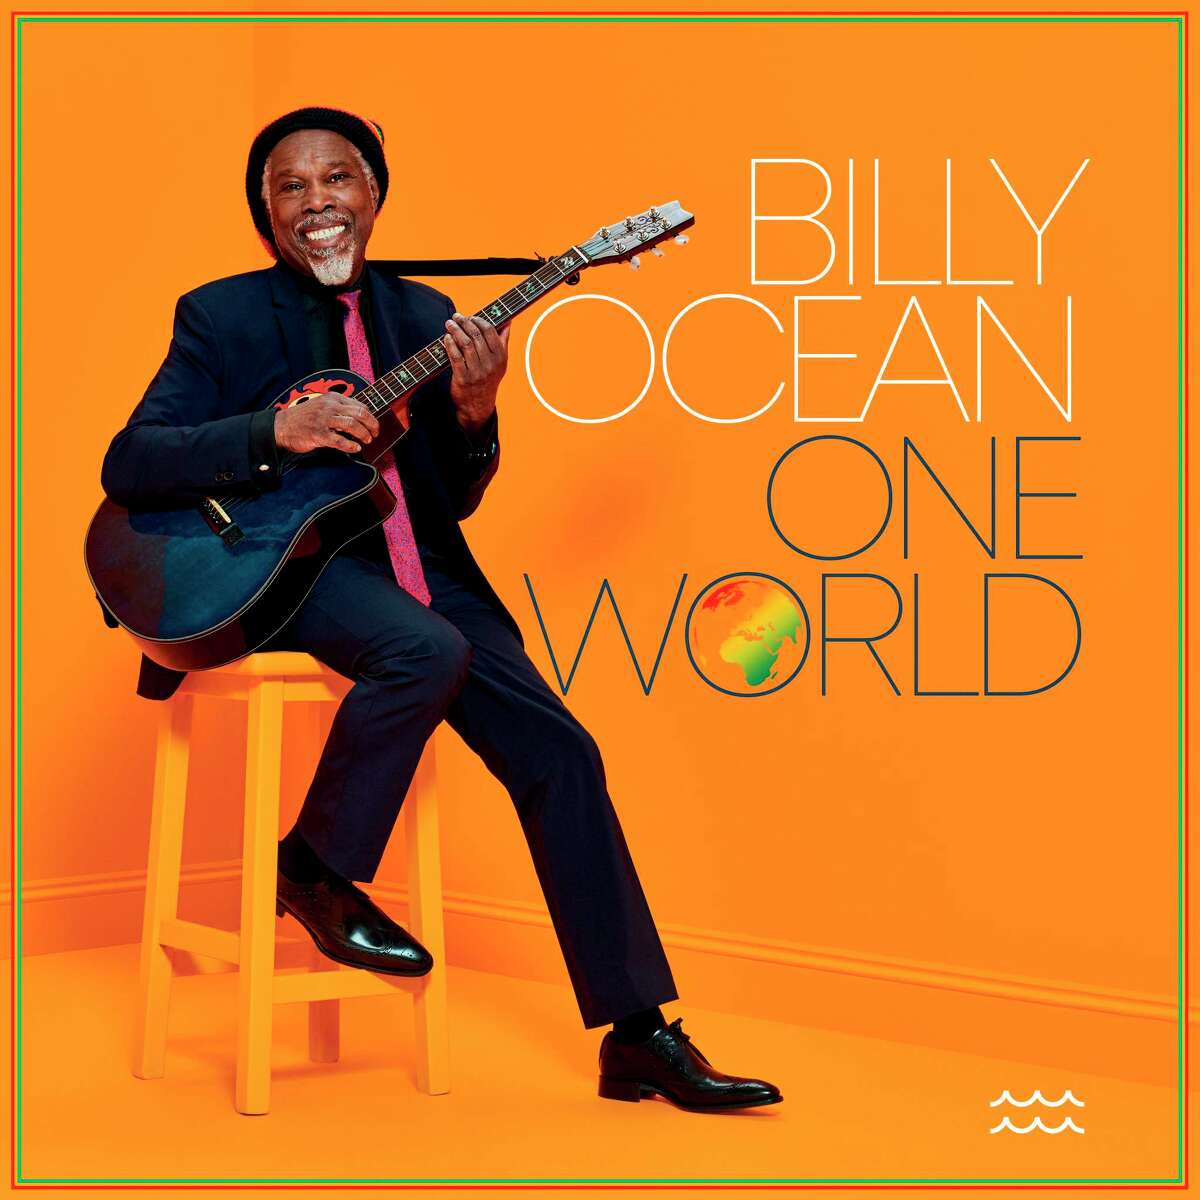 This cover image released by Sony Music shows "One World" by Billy Ocean, available on Sept. 4. (Sony Music via AP)